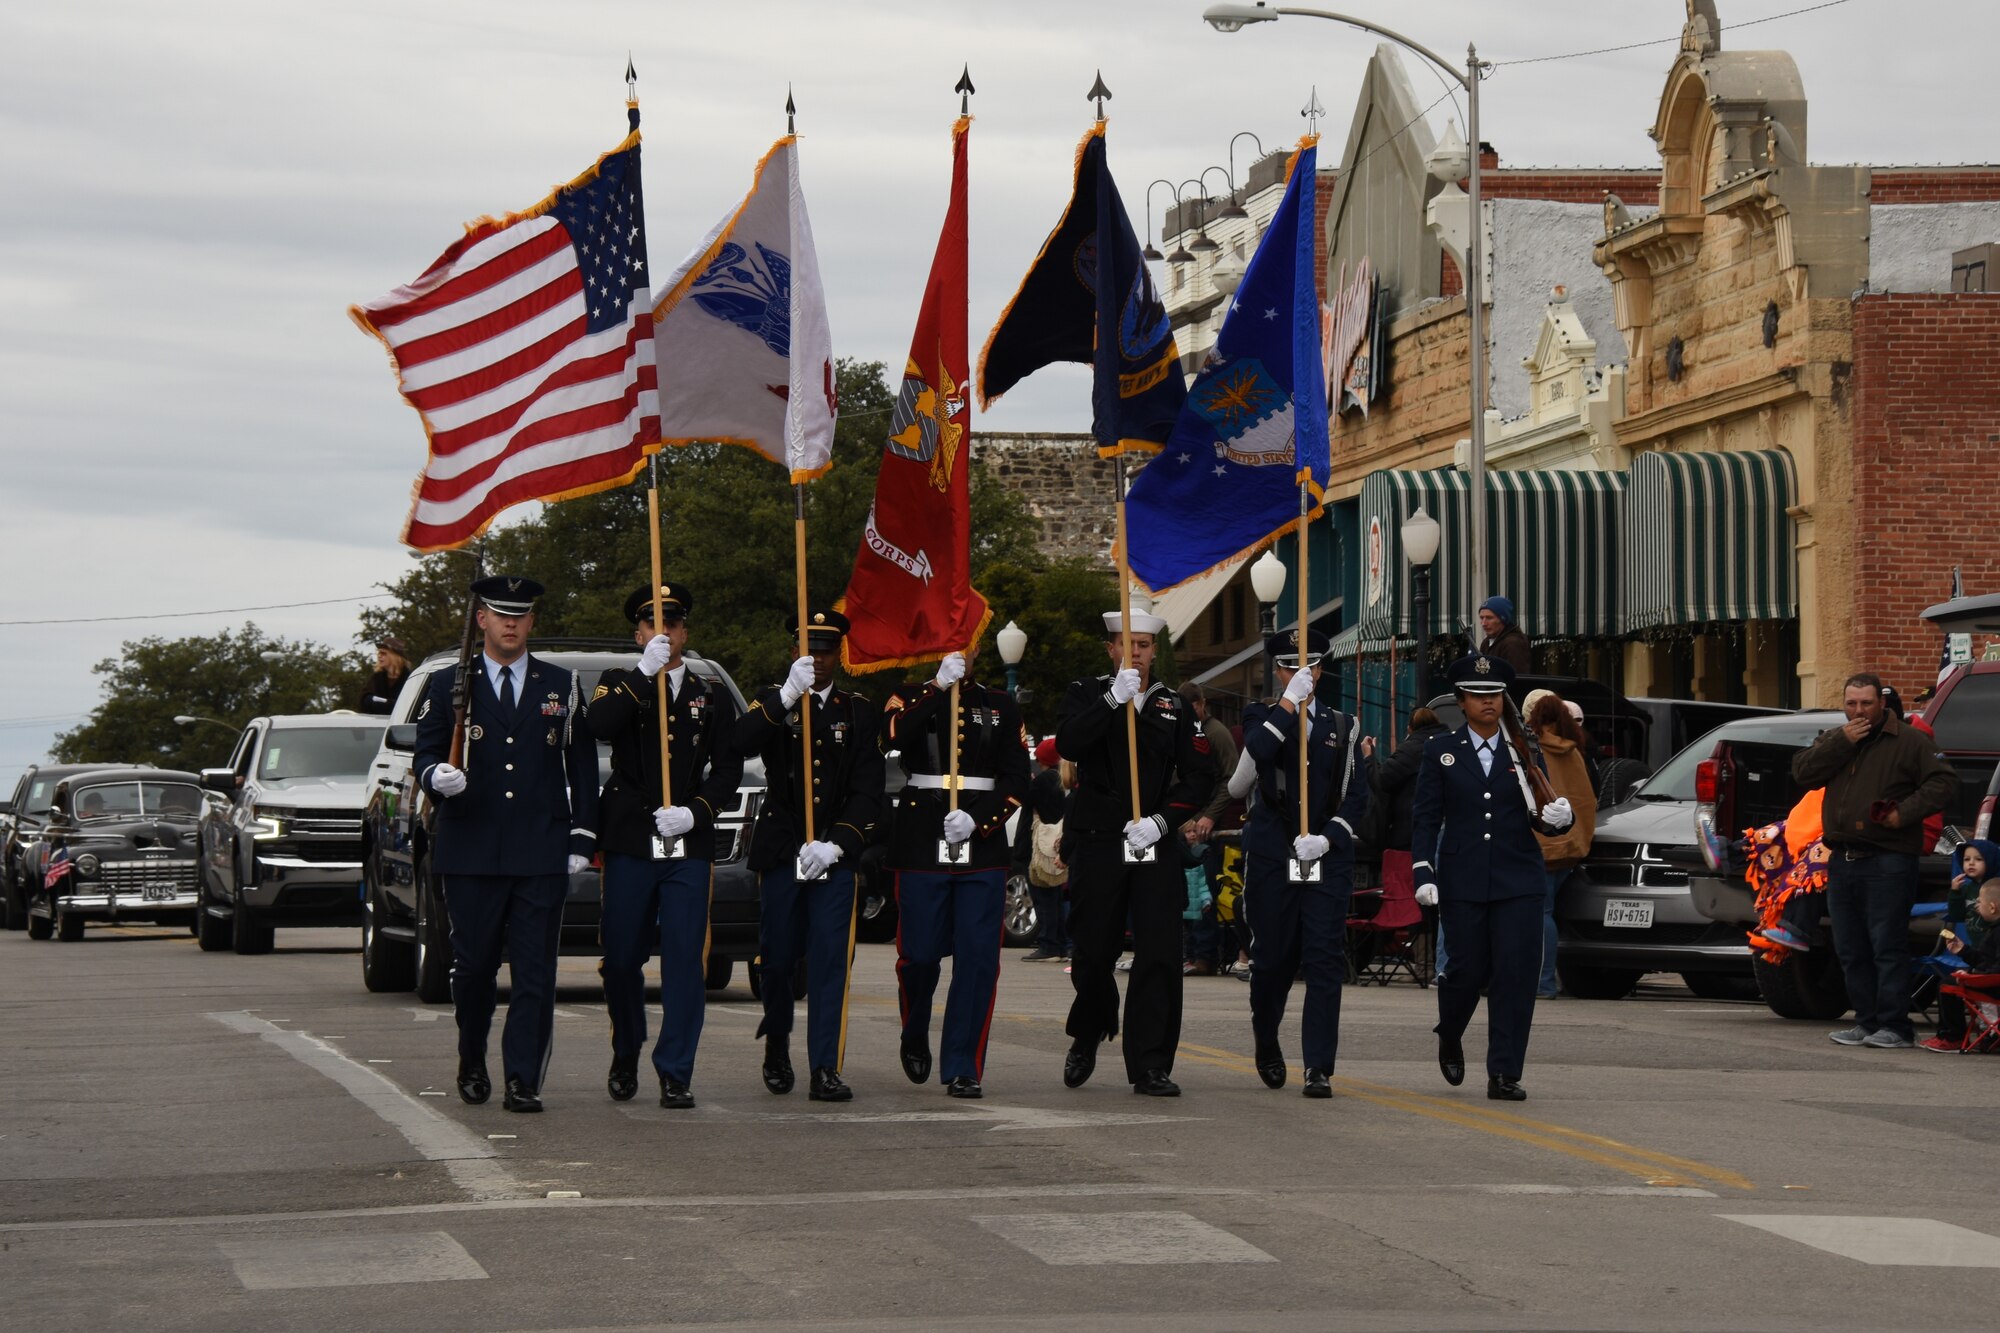 Joint Service Color Guard marches during the Veterans Day Parade in San Angelo, Texas, Nov. 10, 2018. The Joint Service Color Guard consists of members from each branch, followed by the other 400 military members participating in the parade. (U.S. Air Force photo by Airman 1st Class Zachary Chapman/Released)